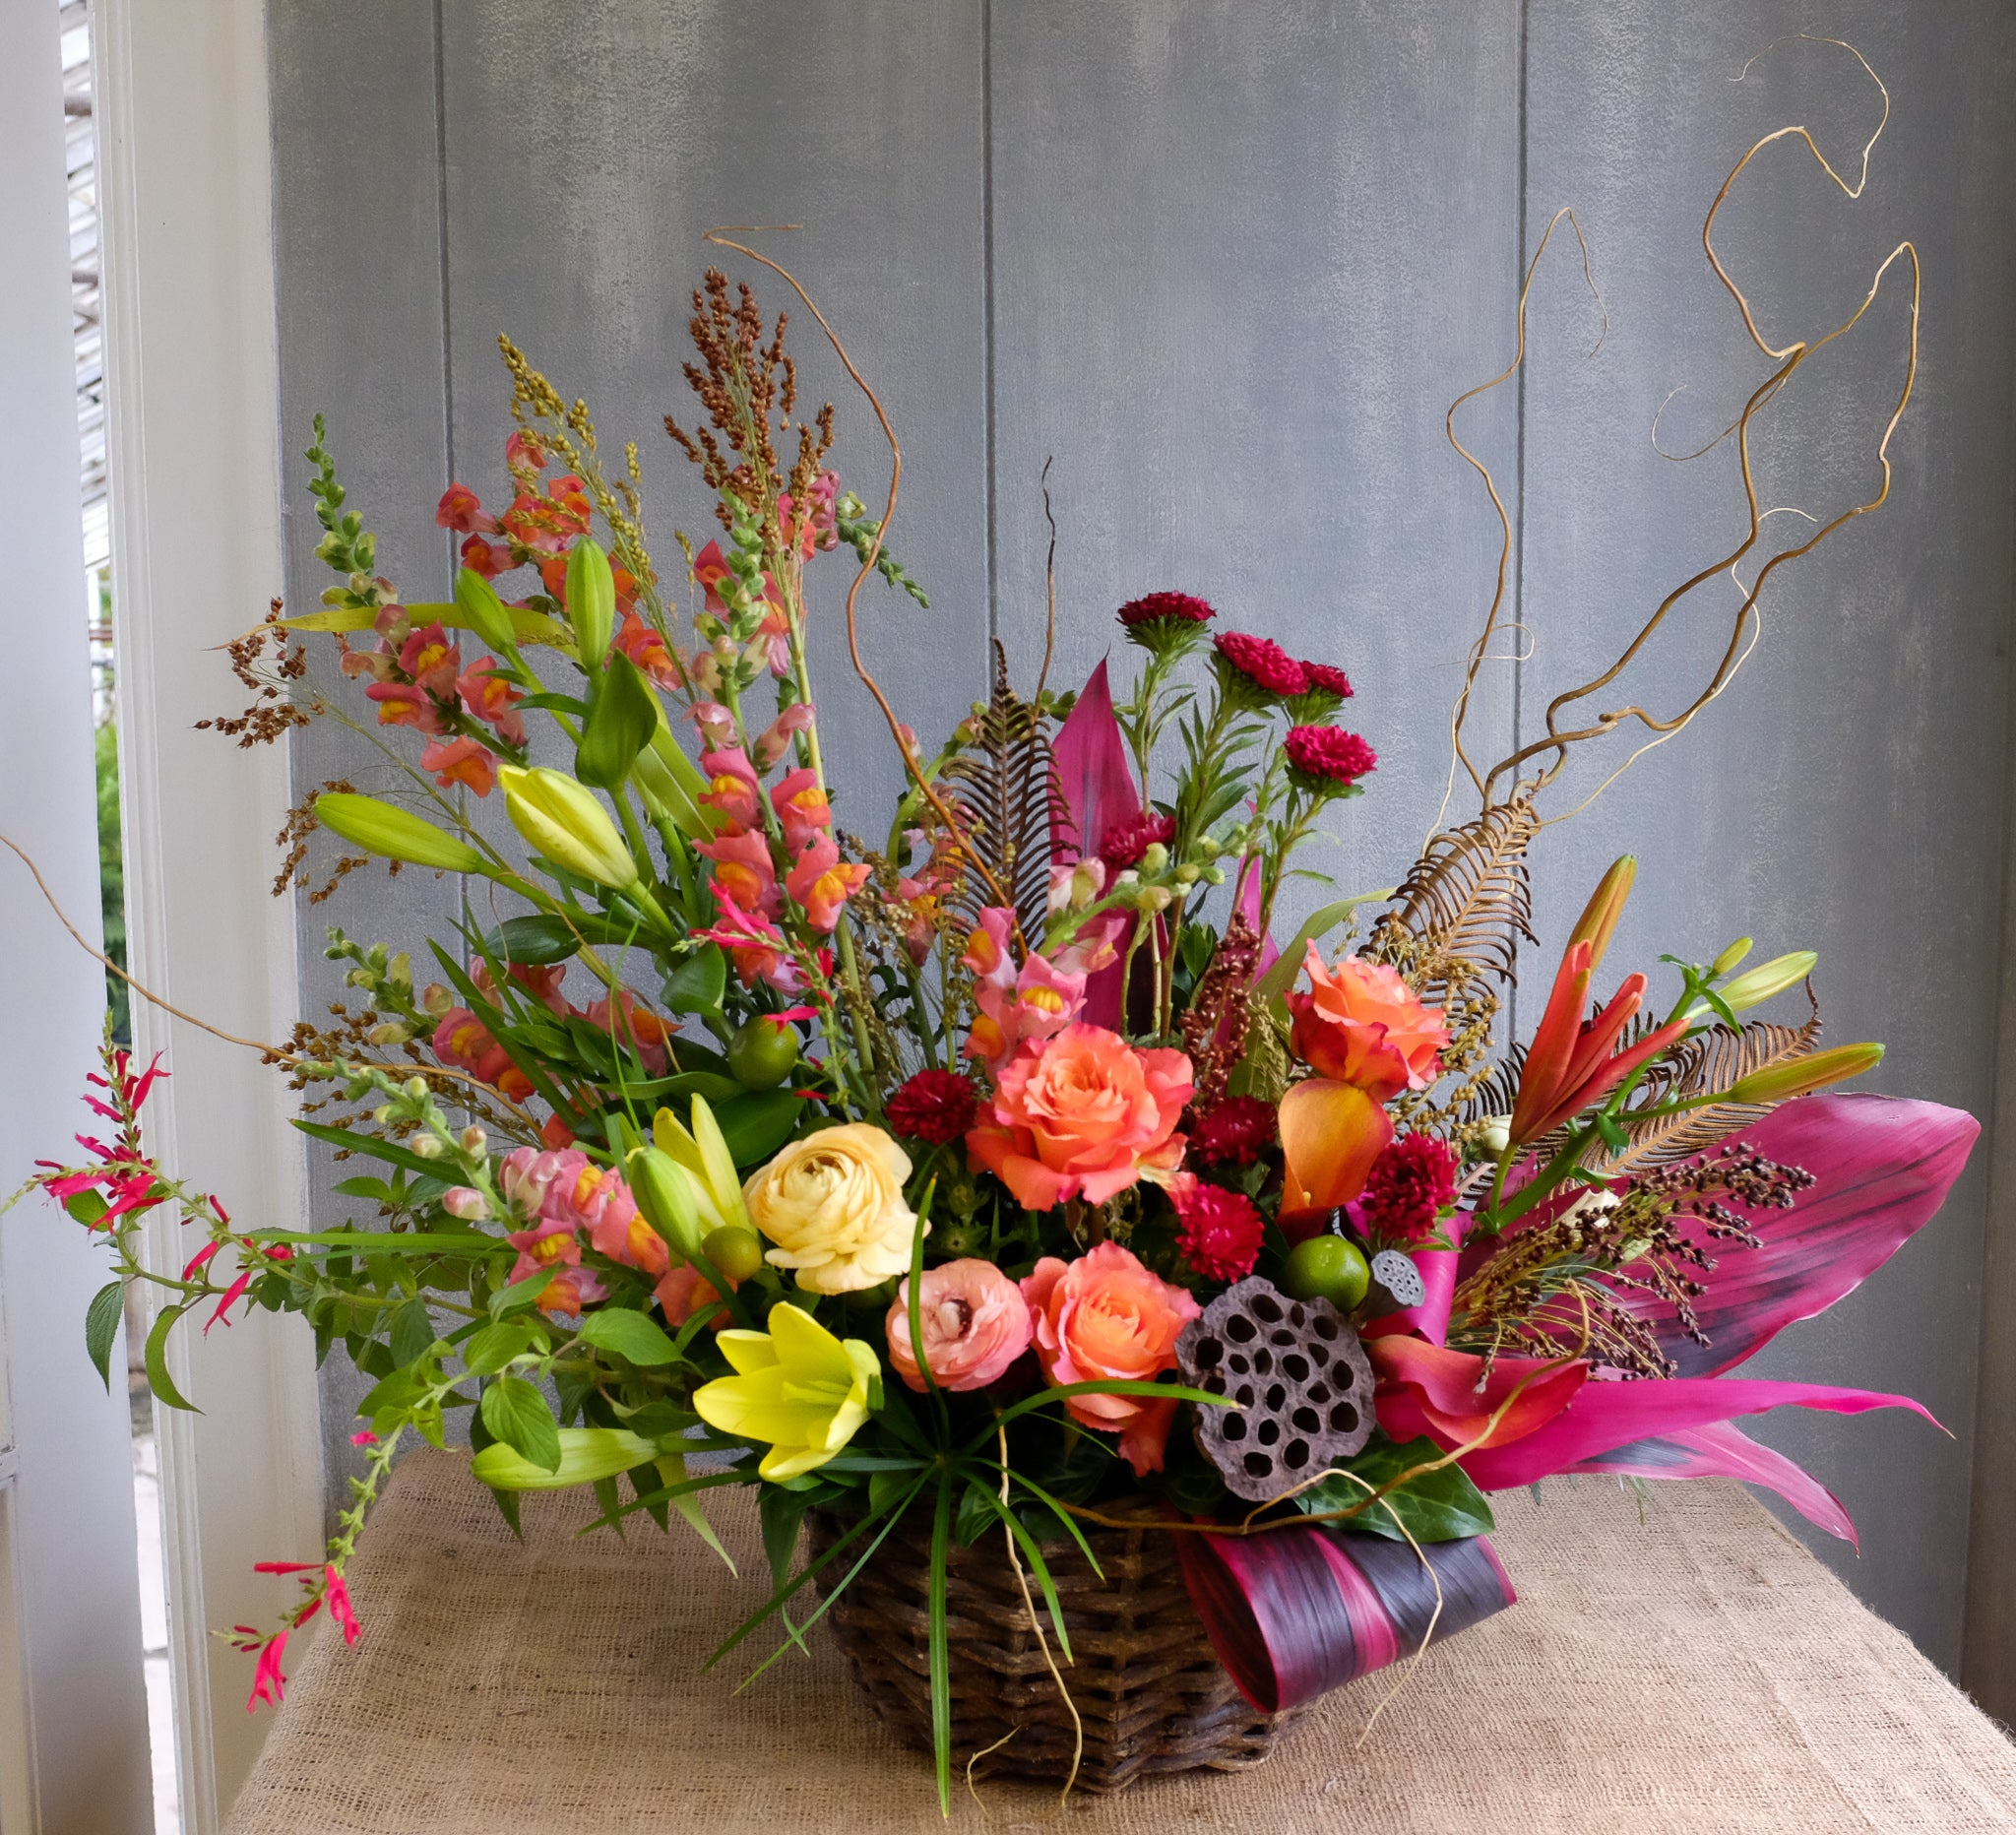 Wicker basket flower design brimming with grasses and autumn toned flowers | Michler's Florist